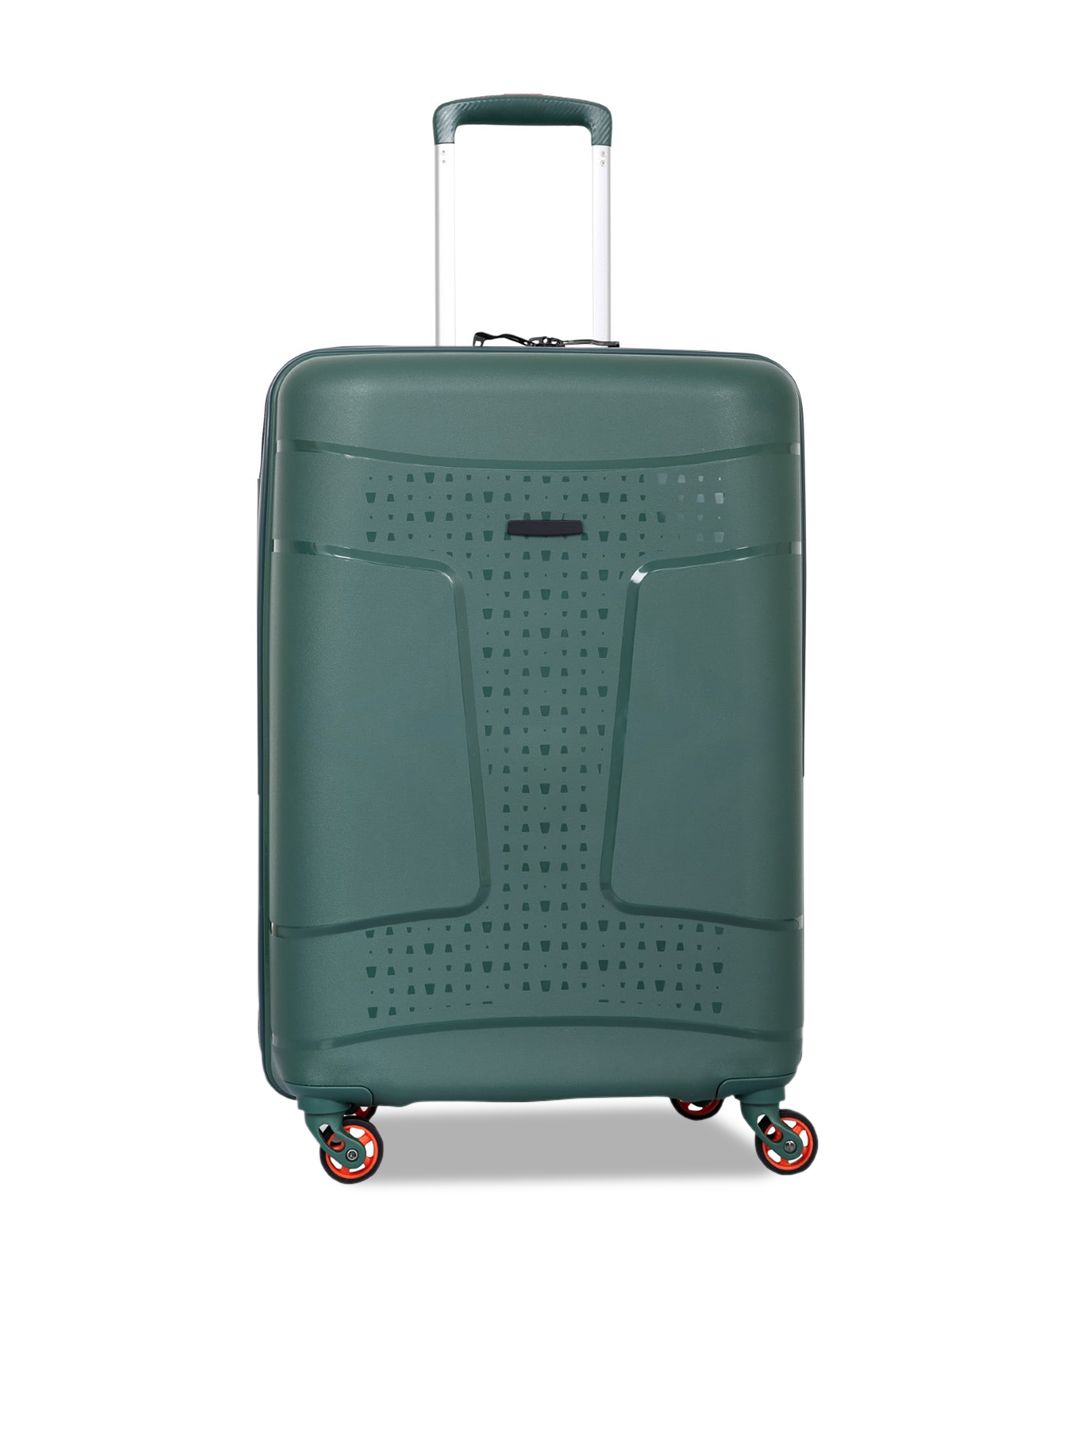 Polo Class Green Scan Trolley Bag - 28 inch Price in India